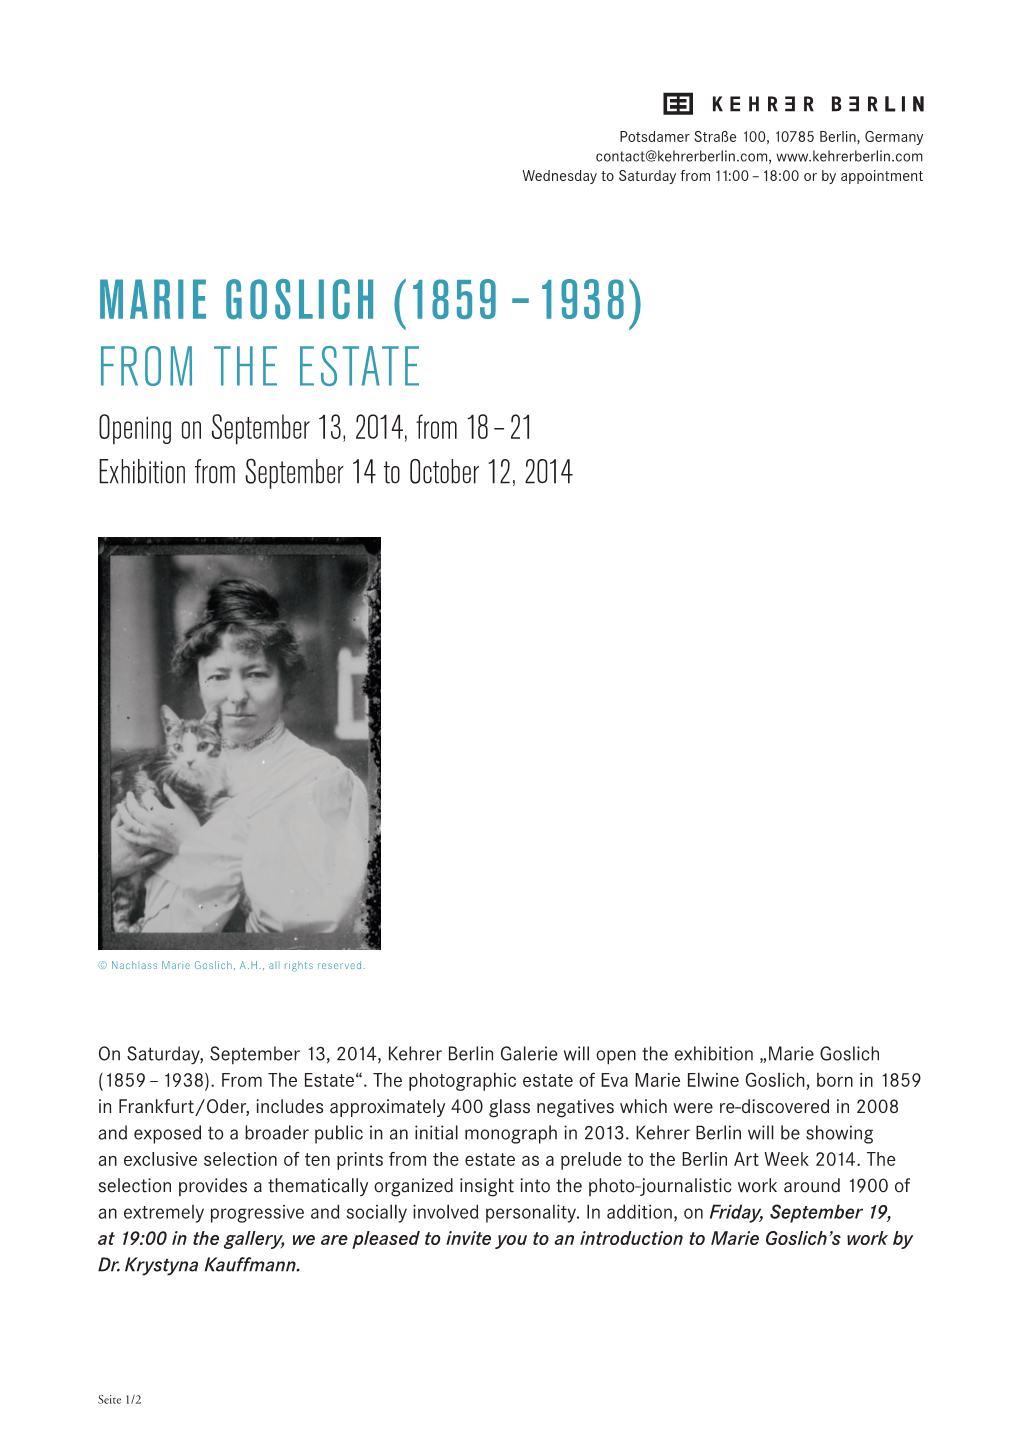 MARIE GOSLICH (1859 – 1938) from the ESTATE Opening on September 13, 2014, from 18 – 21 Exhibition from September 14 to October 12, 2014